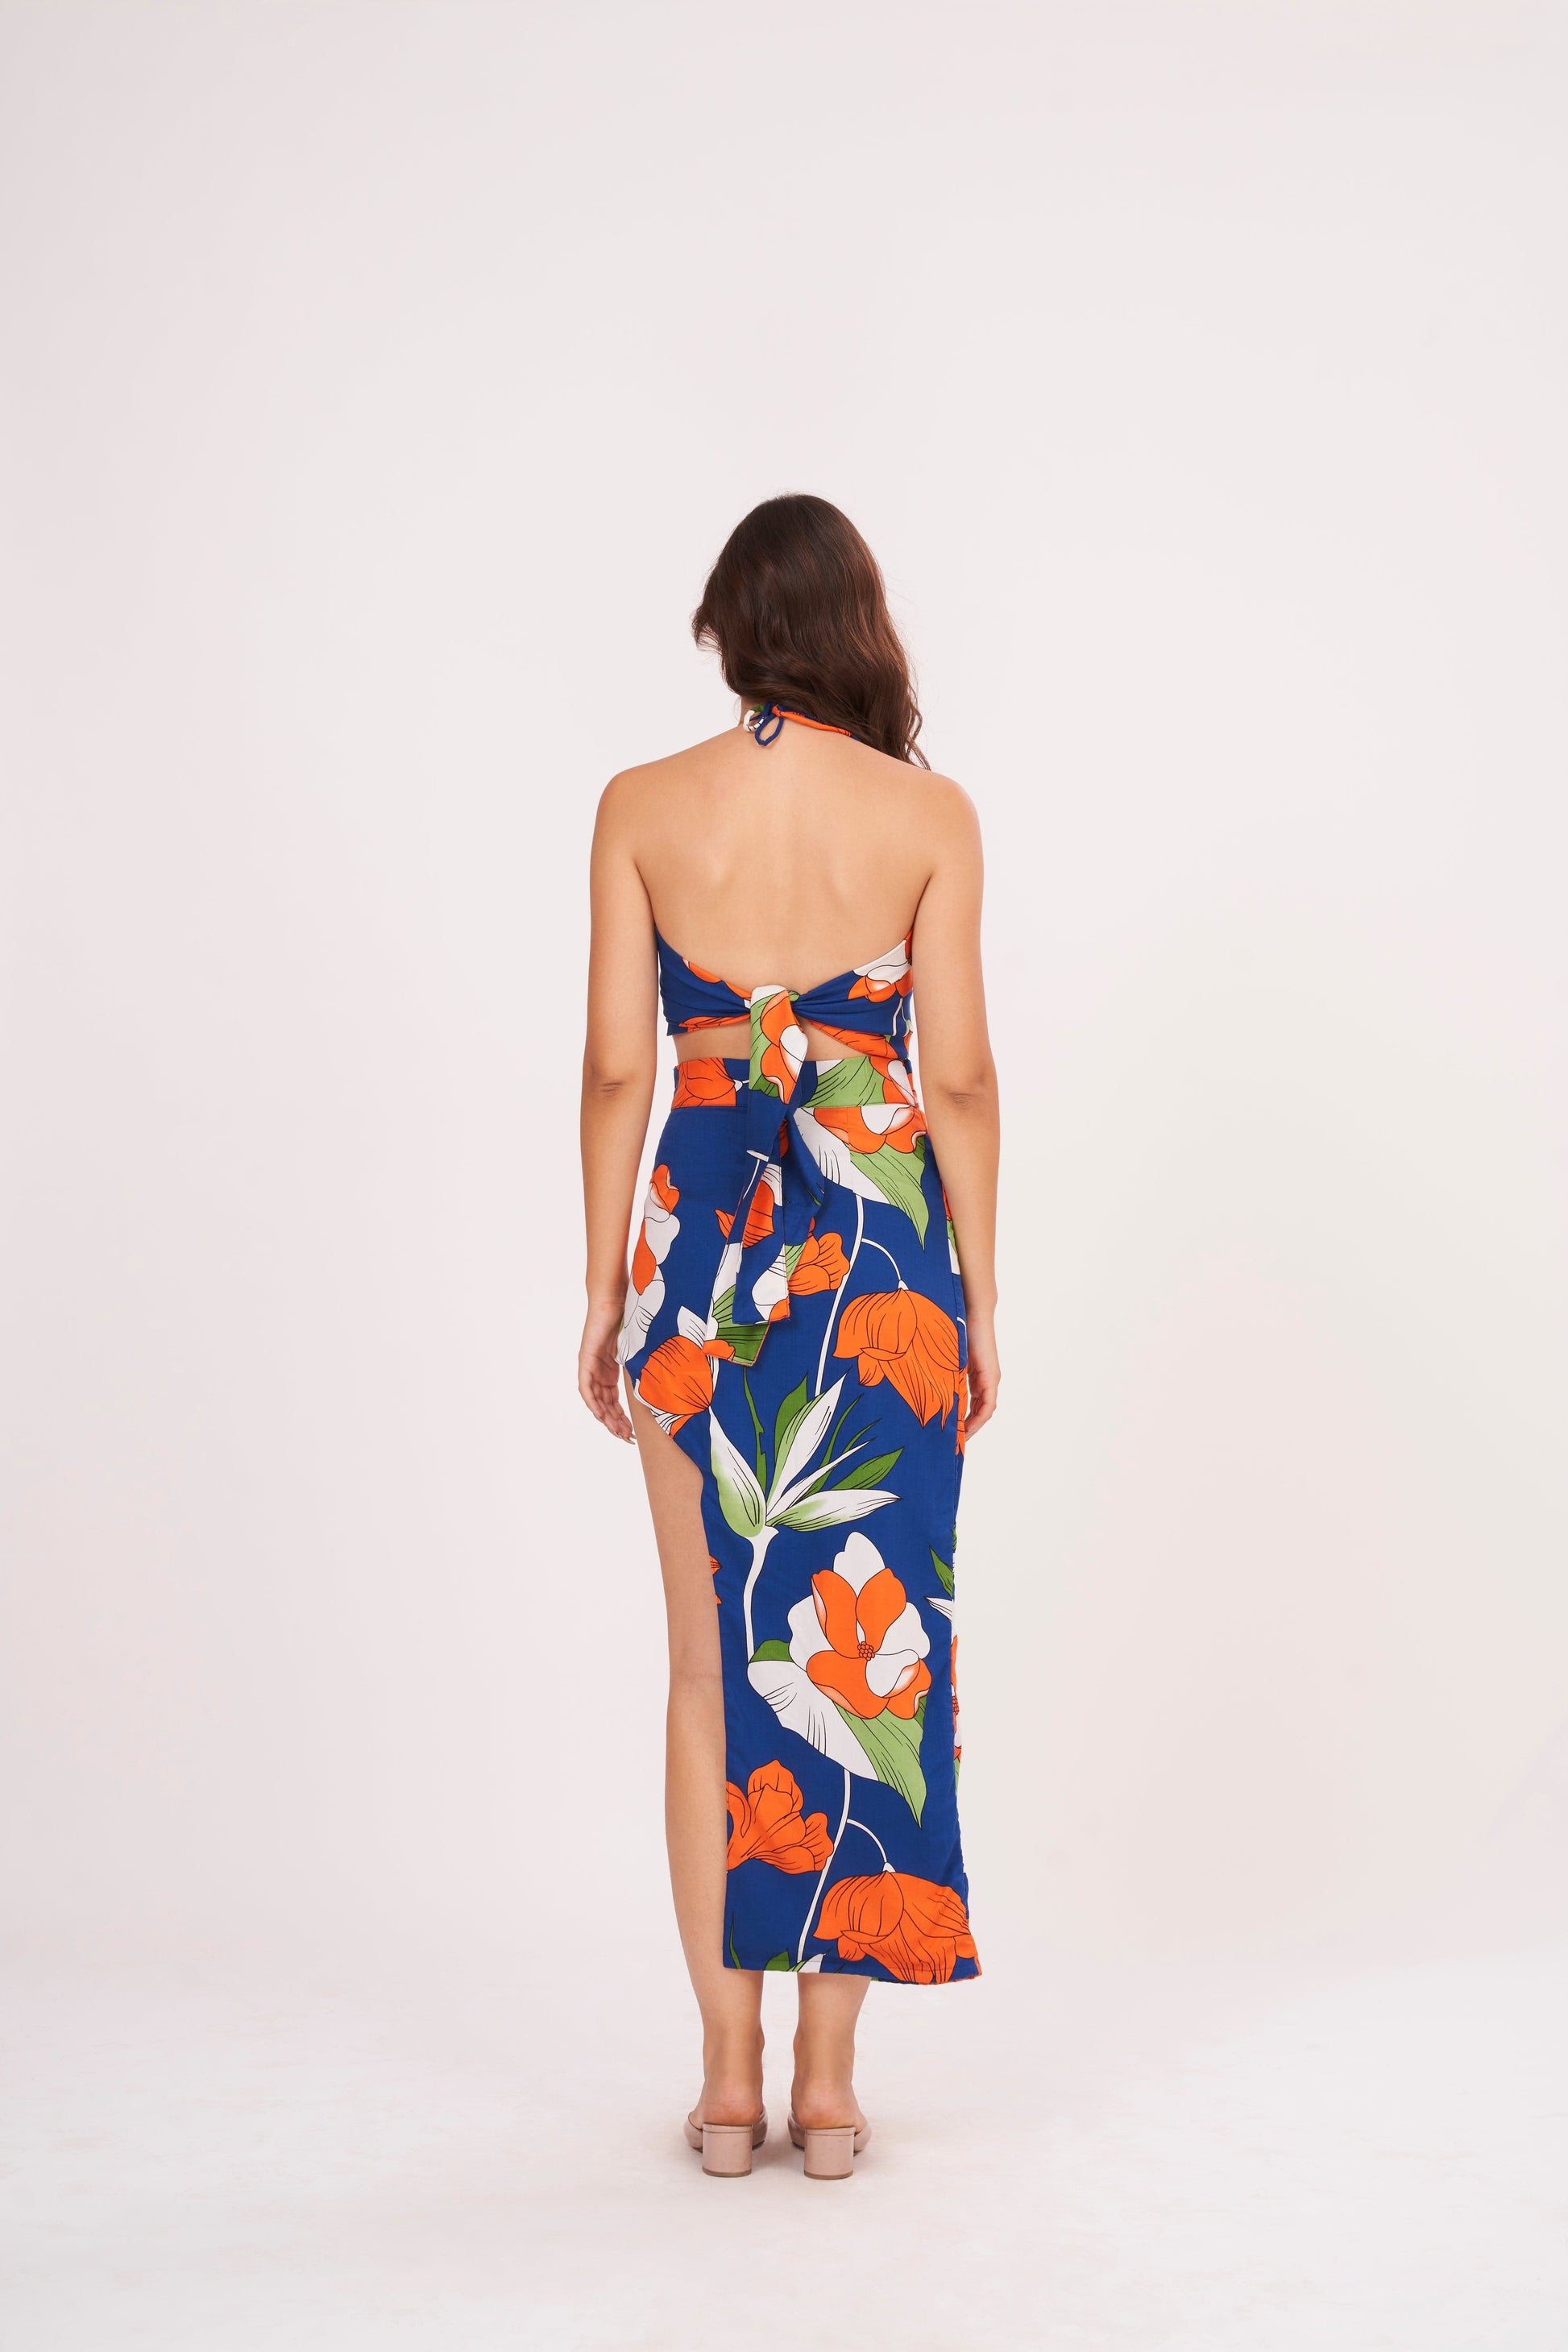 Long floral skirt with sultry thigh-high slit, crafted from high-quality muslin for comfort and durability.